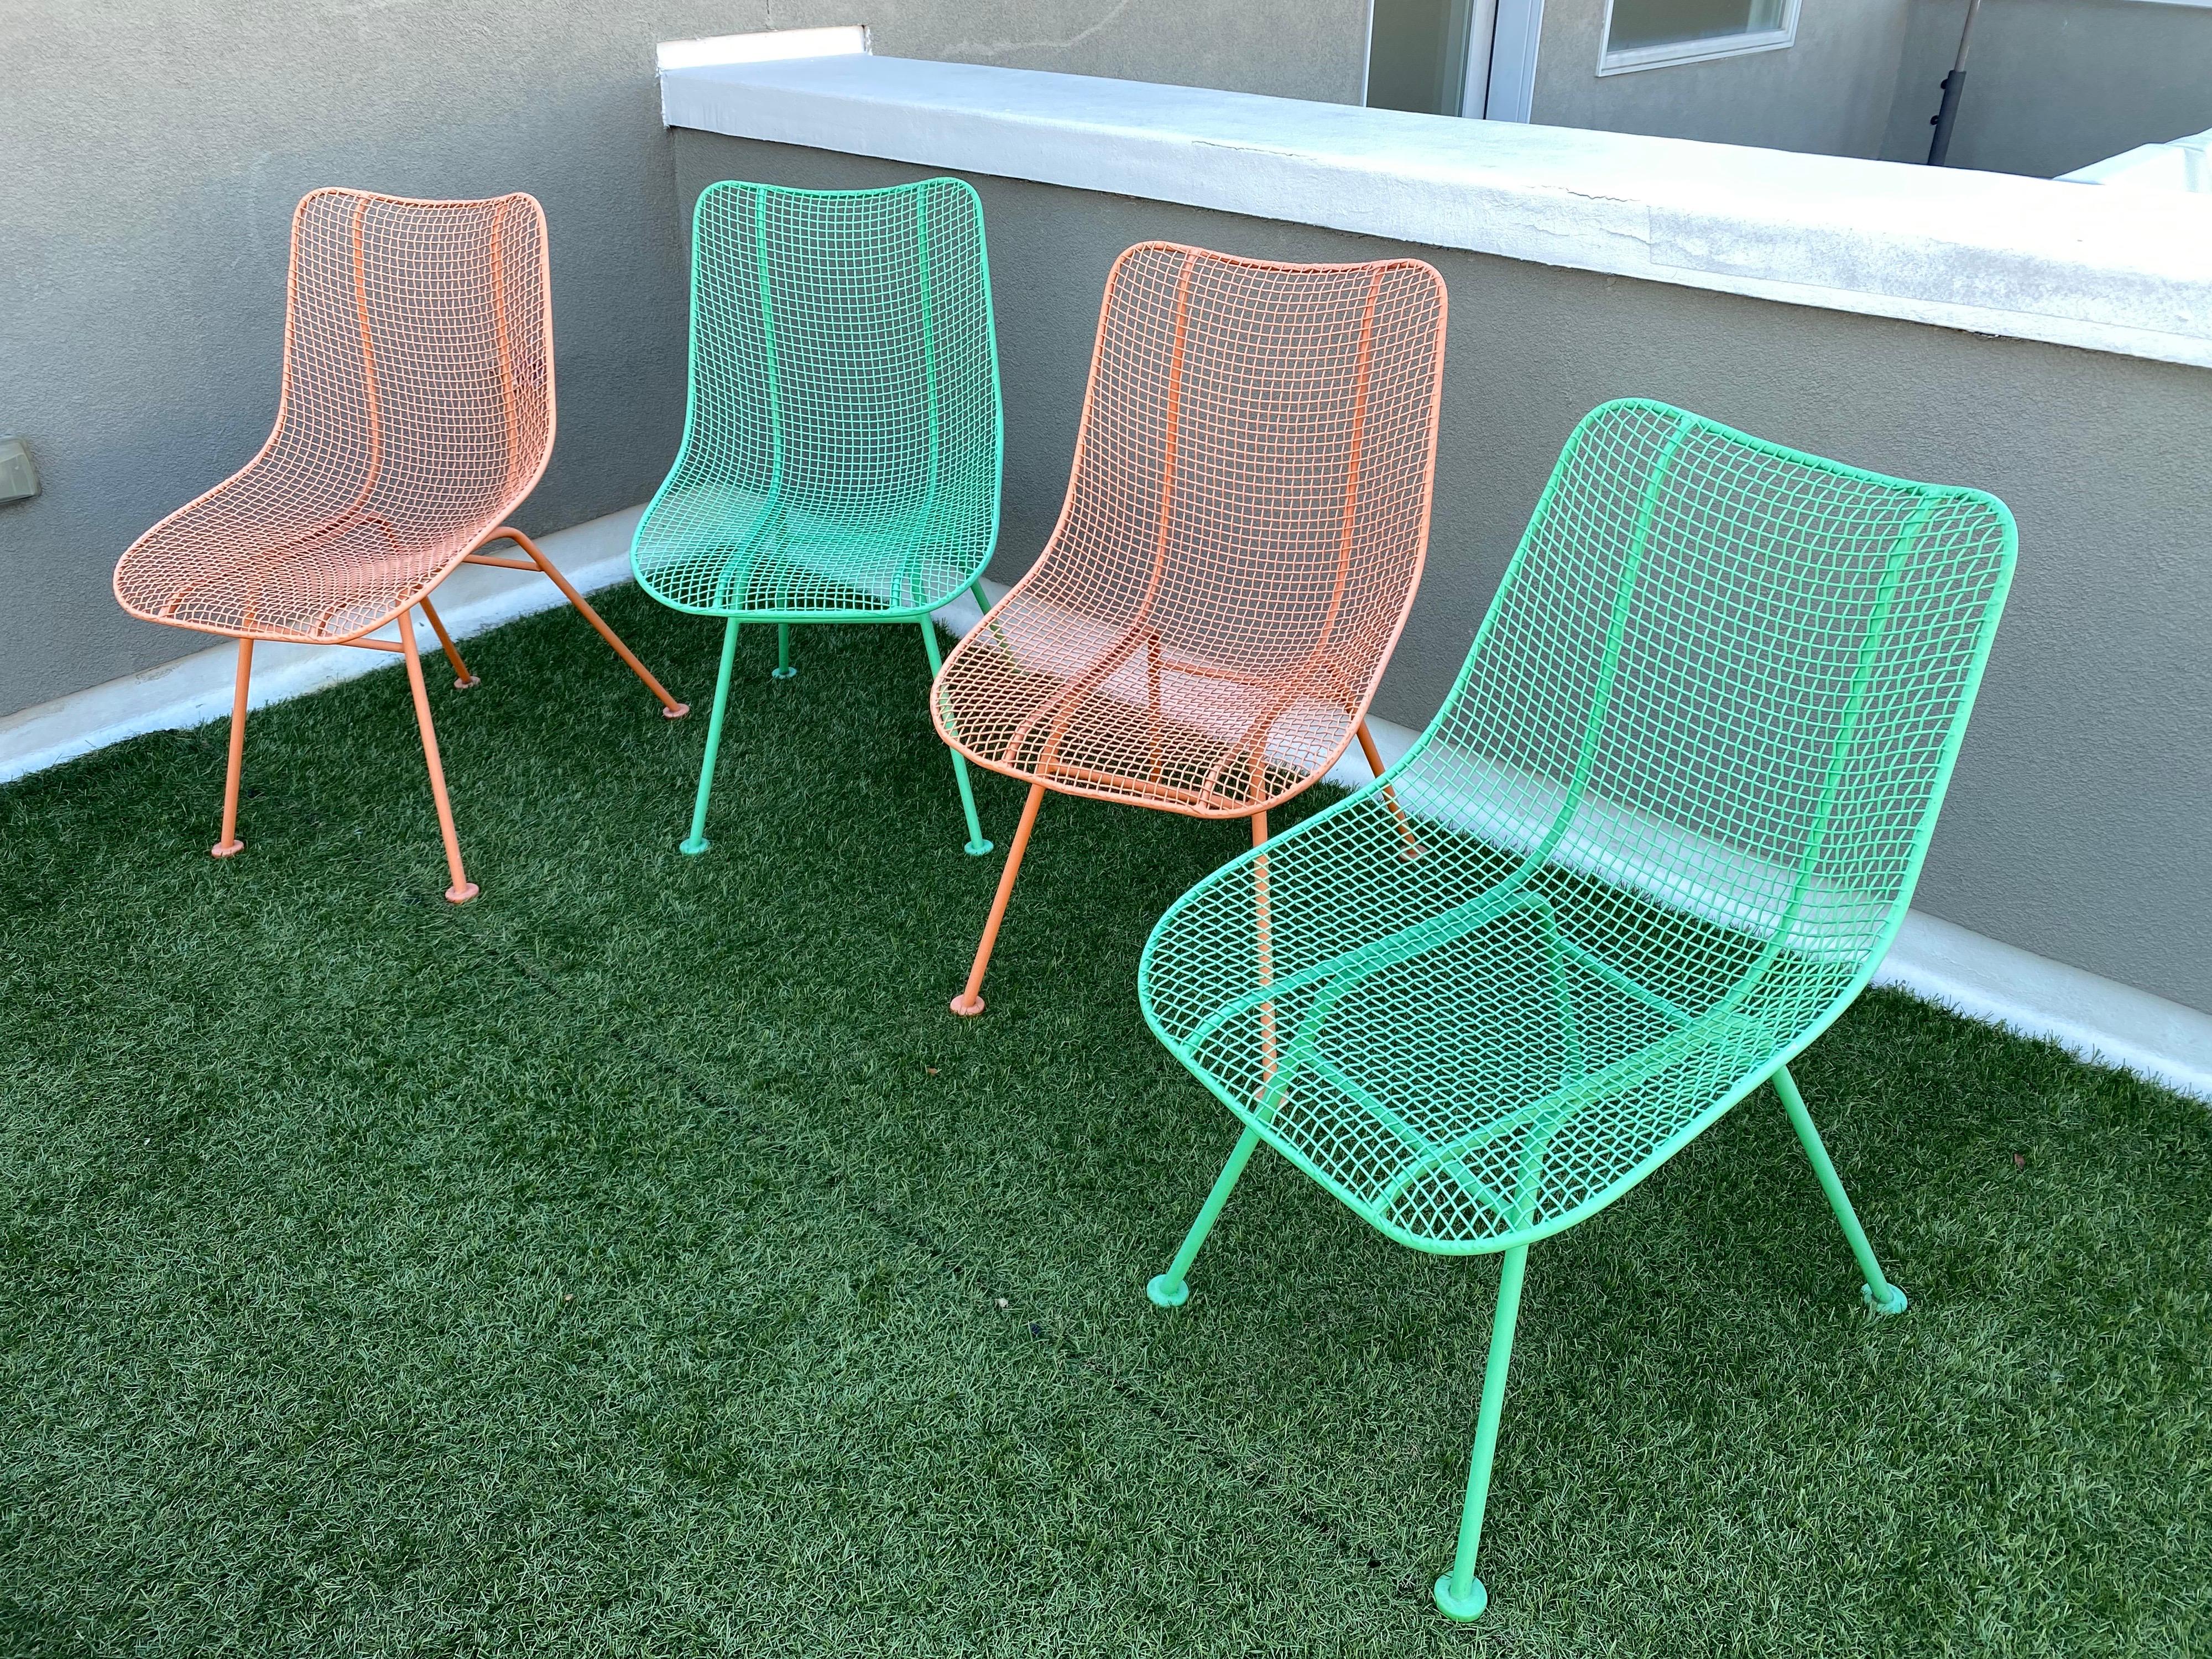 Set of 4 Russell Woodard slipper dining chairs. 2 orange and 2 green. Powder Coated about 15 years ago. Overall in good shape, but does show fading to paint. Entire set available.